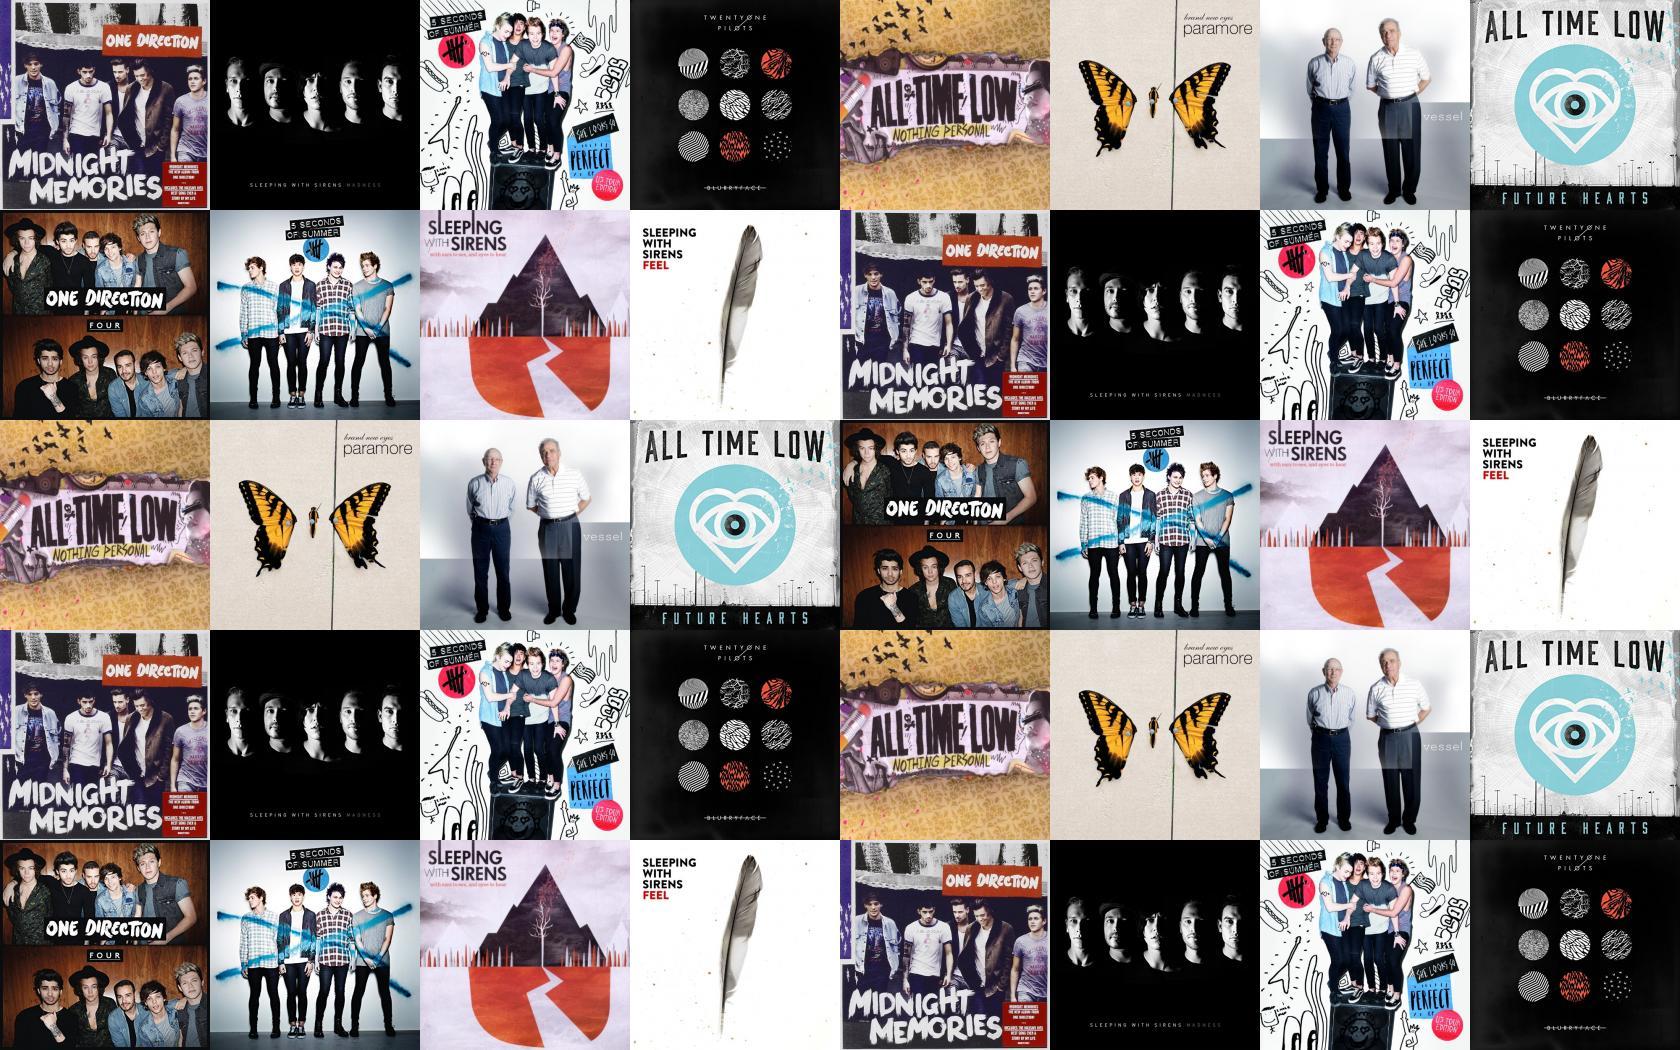 One Direction Midnight Memories Sleeping With Sirens Madness Wallpaper « Tiled Desktop Wallpaper